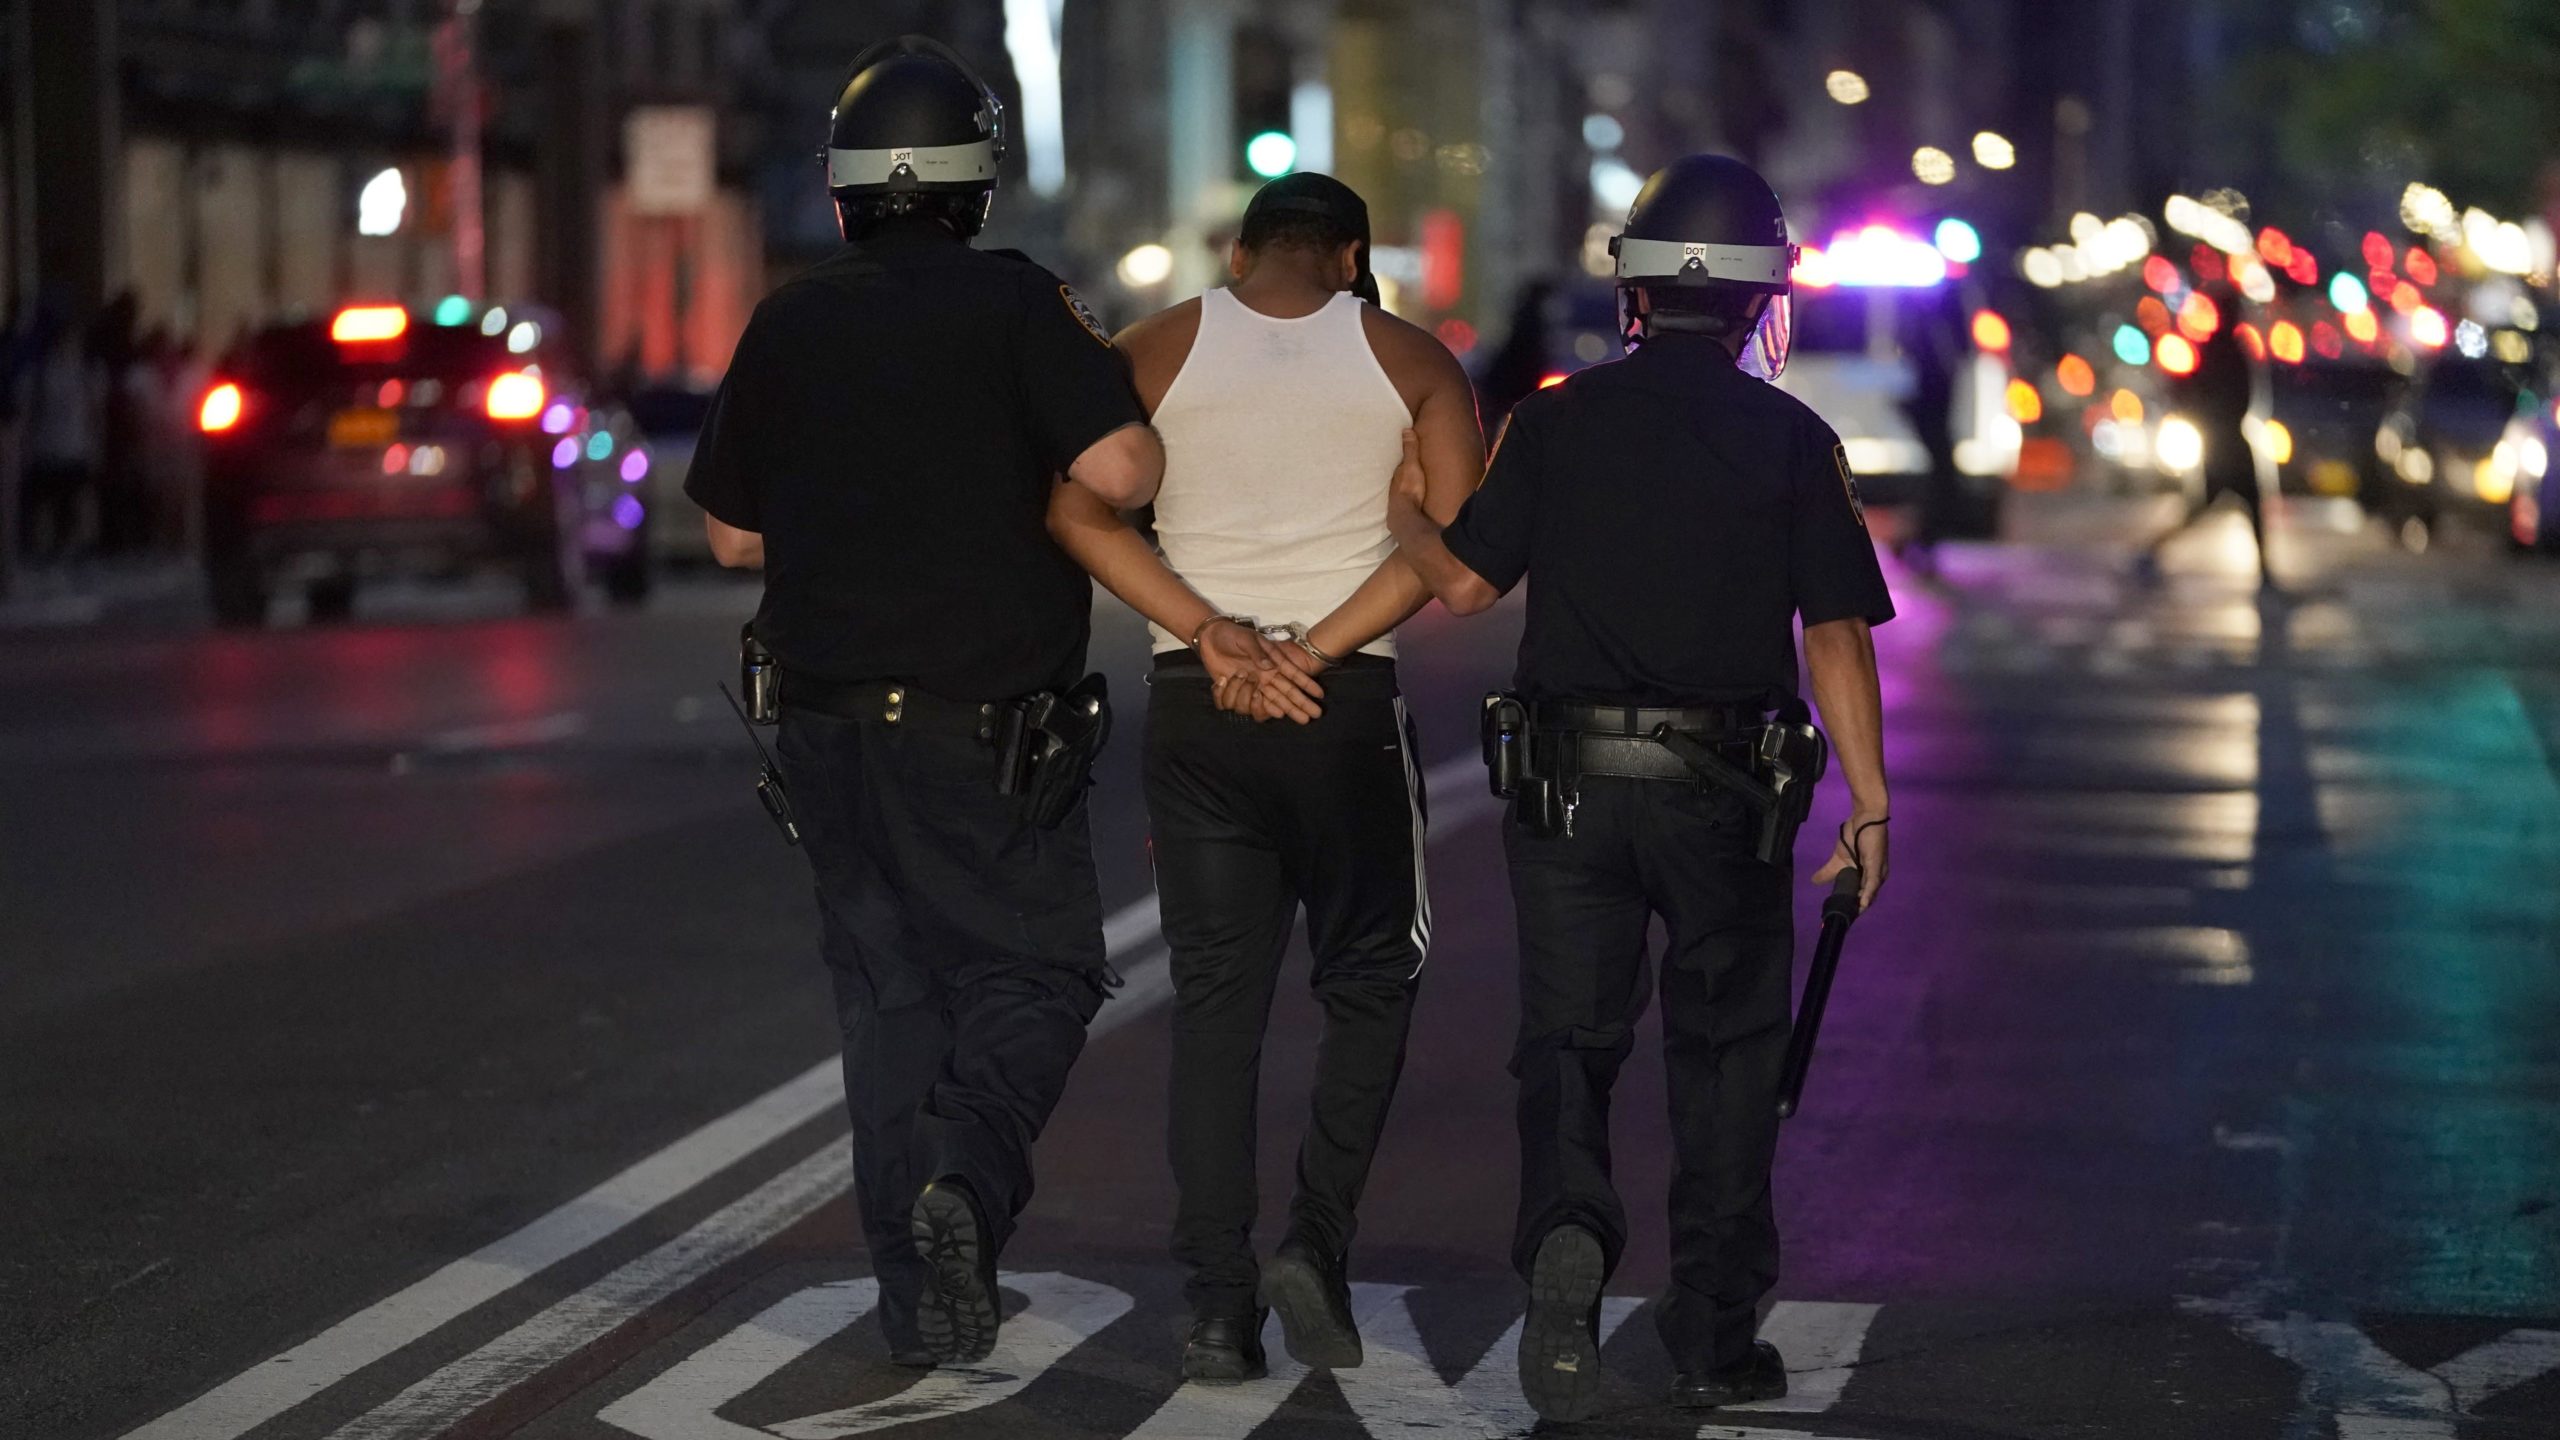 Police arrest a protester in New York on June 1, 2020. (Photo: Timothy A. Clary, AFP via Getty Images)